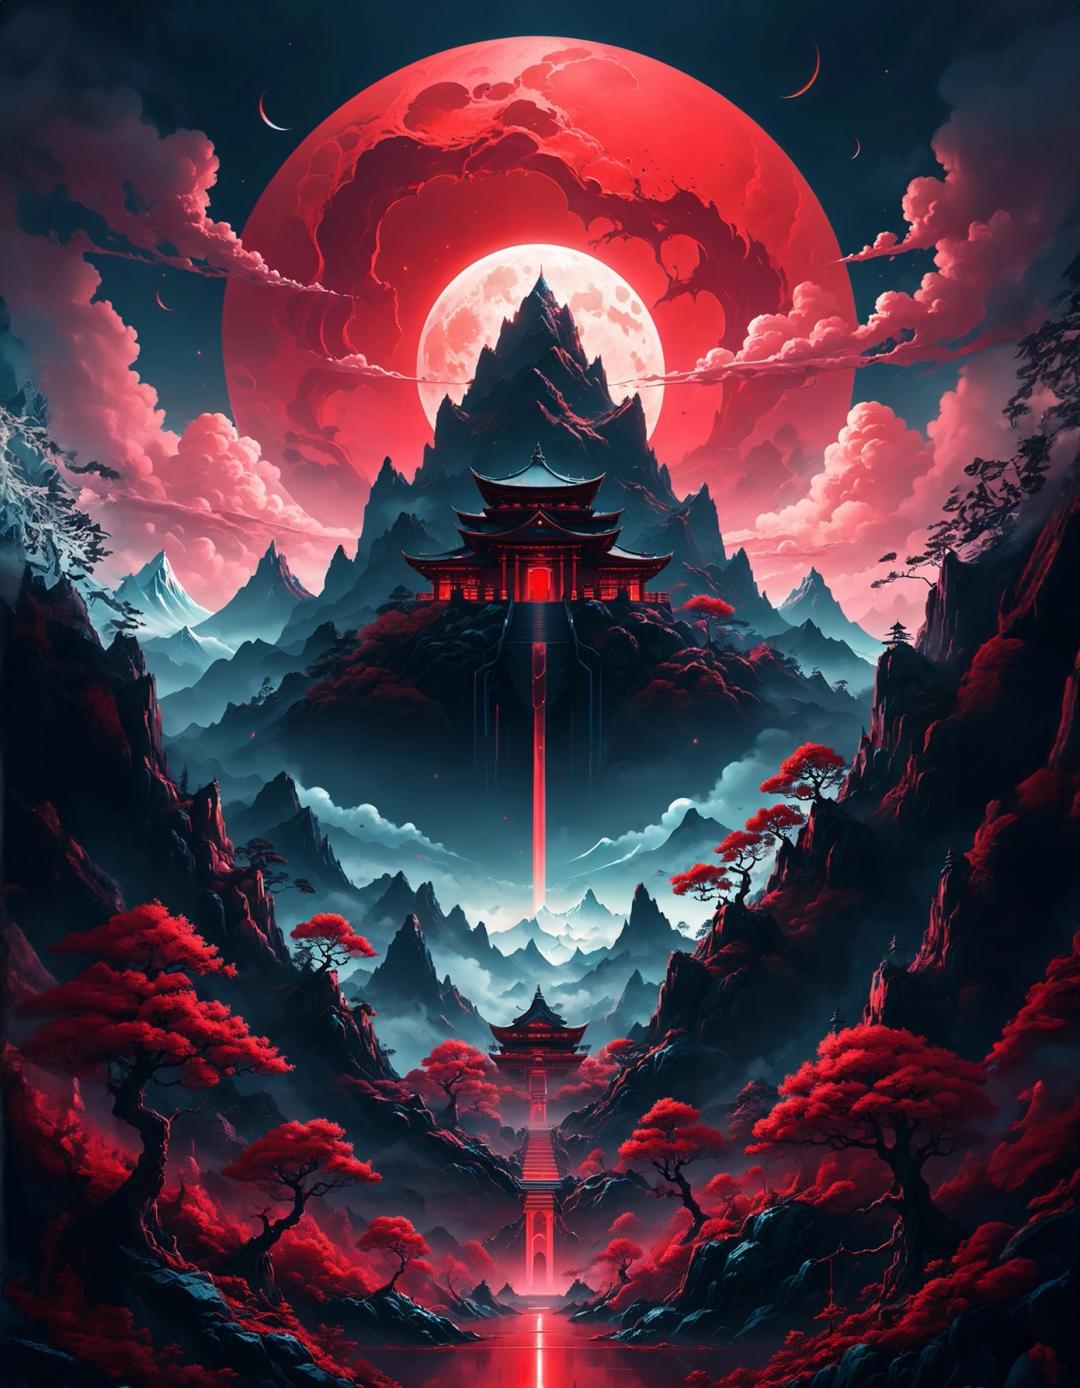 Scifi vibes. Otherworldly. Cinematic. Ominous mountain, digital art, inspired by Cyril Rolando, digital art, blood red moon